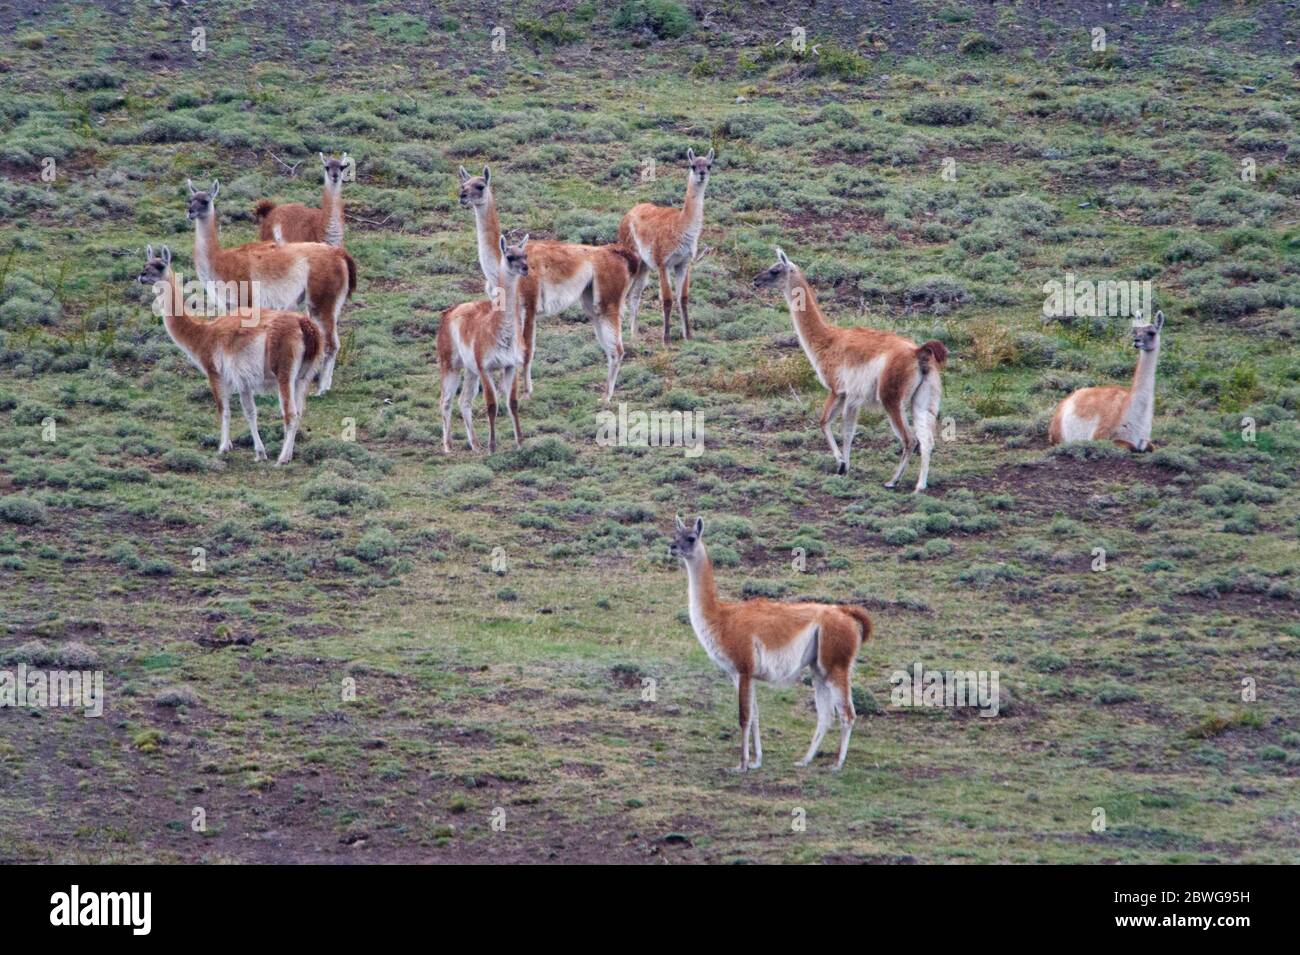 Herd of guanacos (Lama guanicoe) on grassy slope, Patagonia, Chile, South America Stock Photo